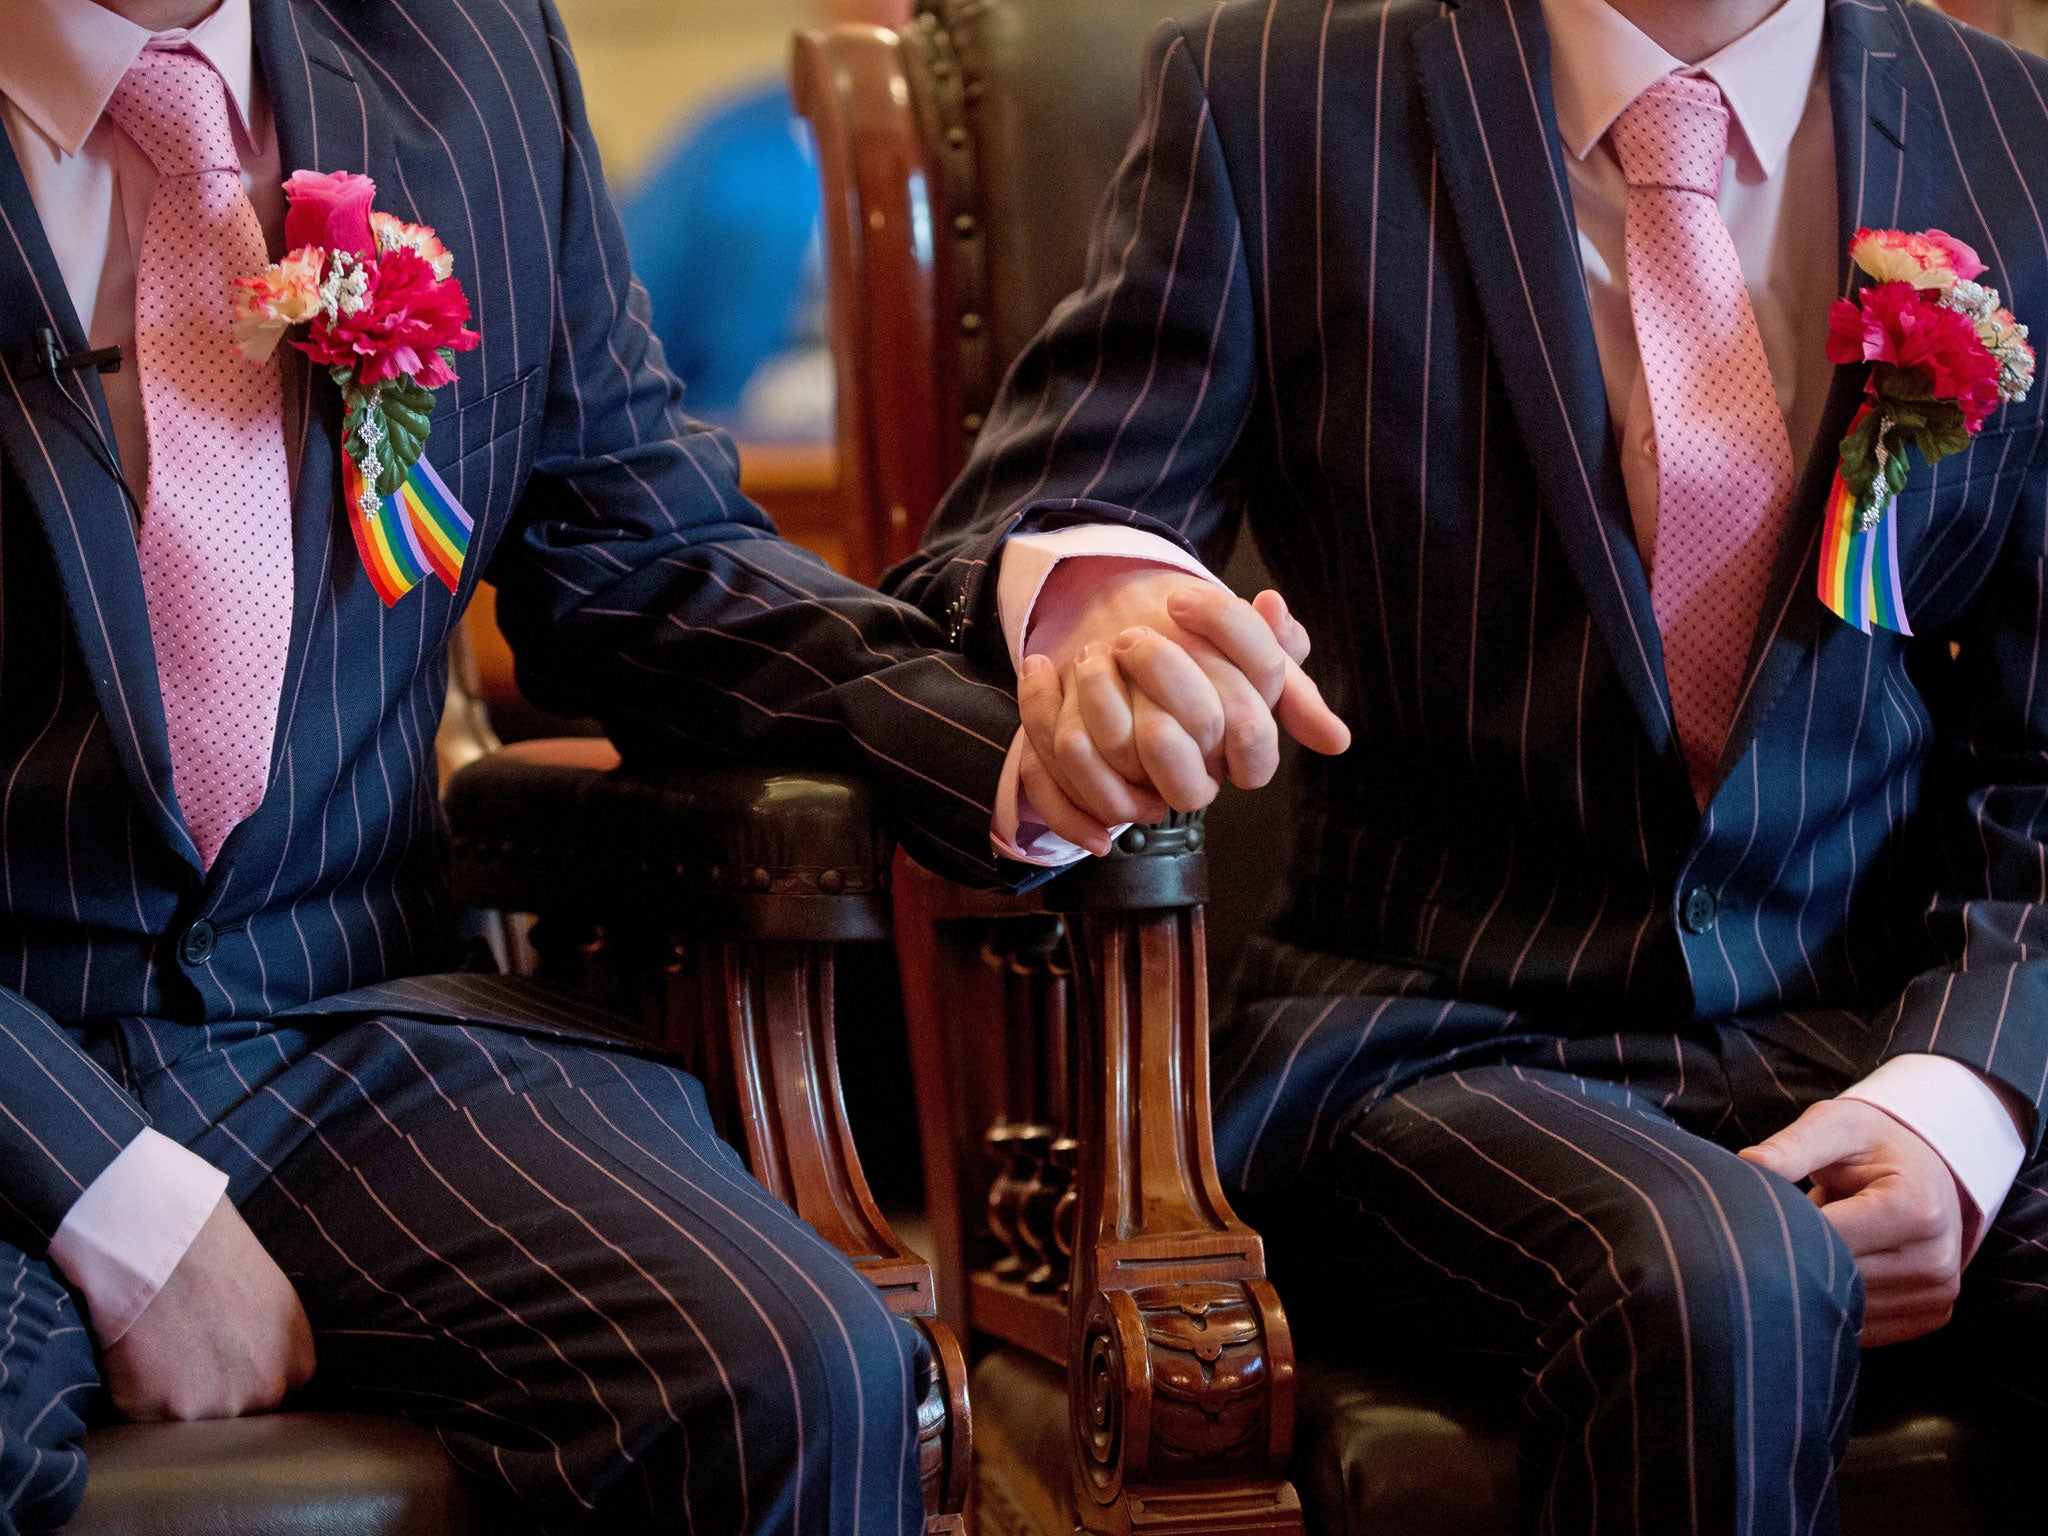 A couple hold hands during their wedding ceremony in Brighton, southern England